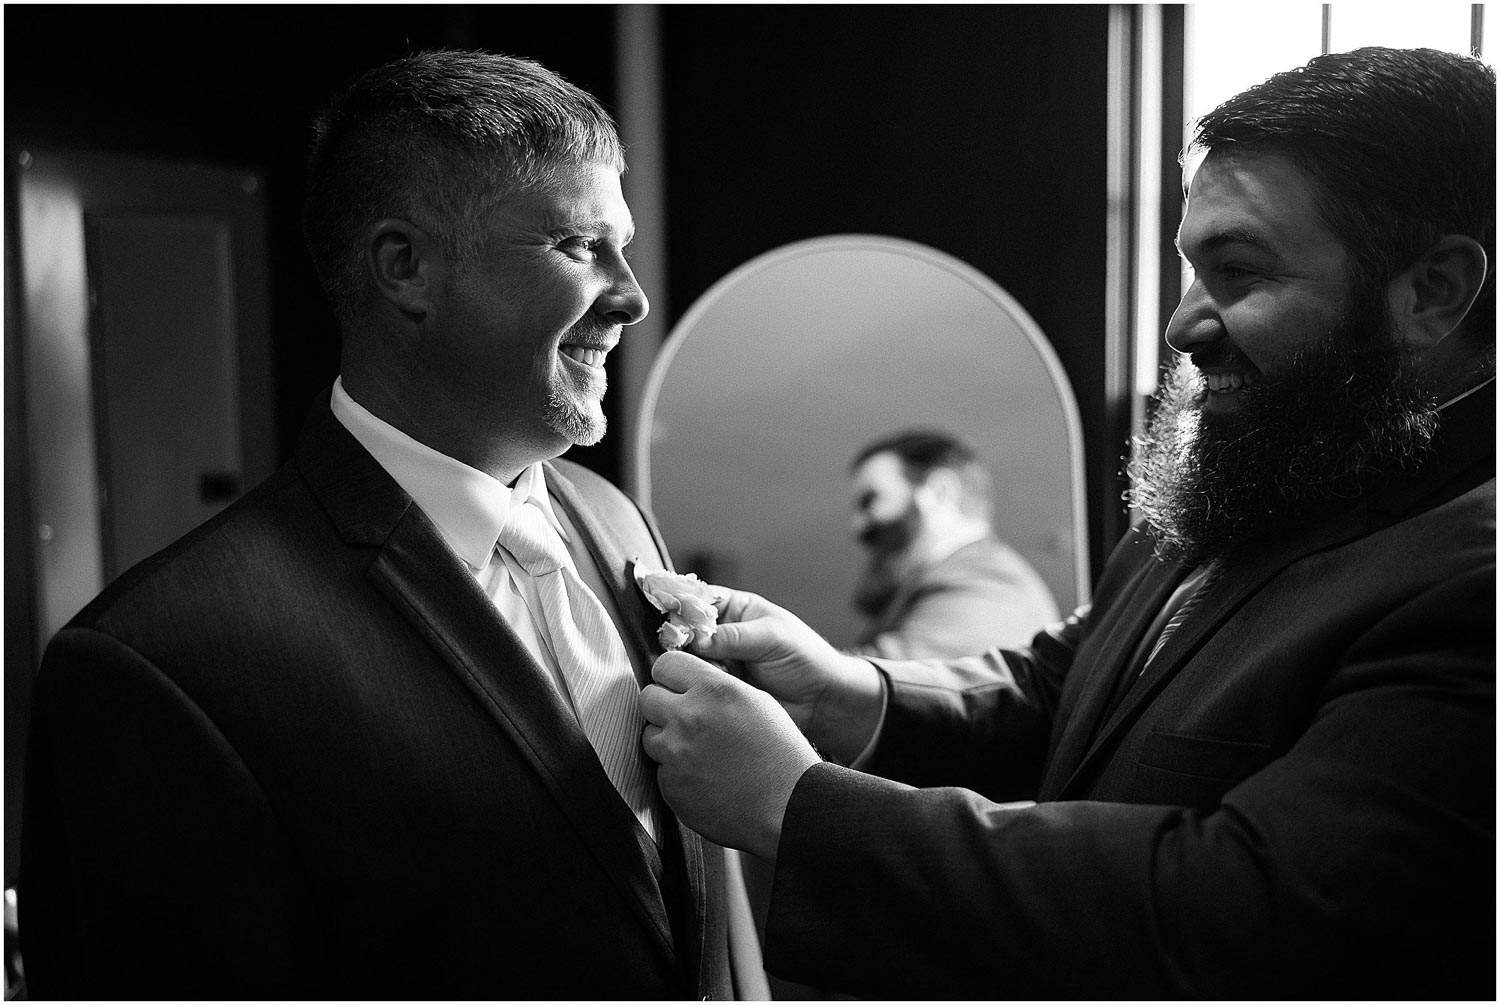 A black and white photo of a bearded man helping another man adjust his tuxedo, both smiling joyfully.